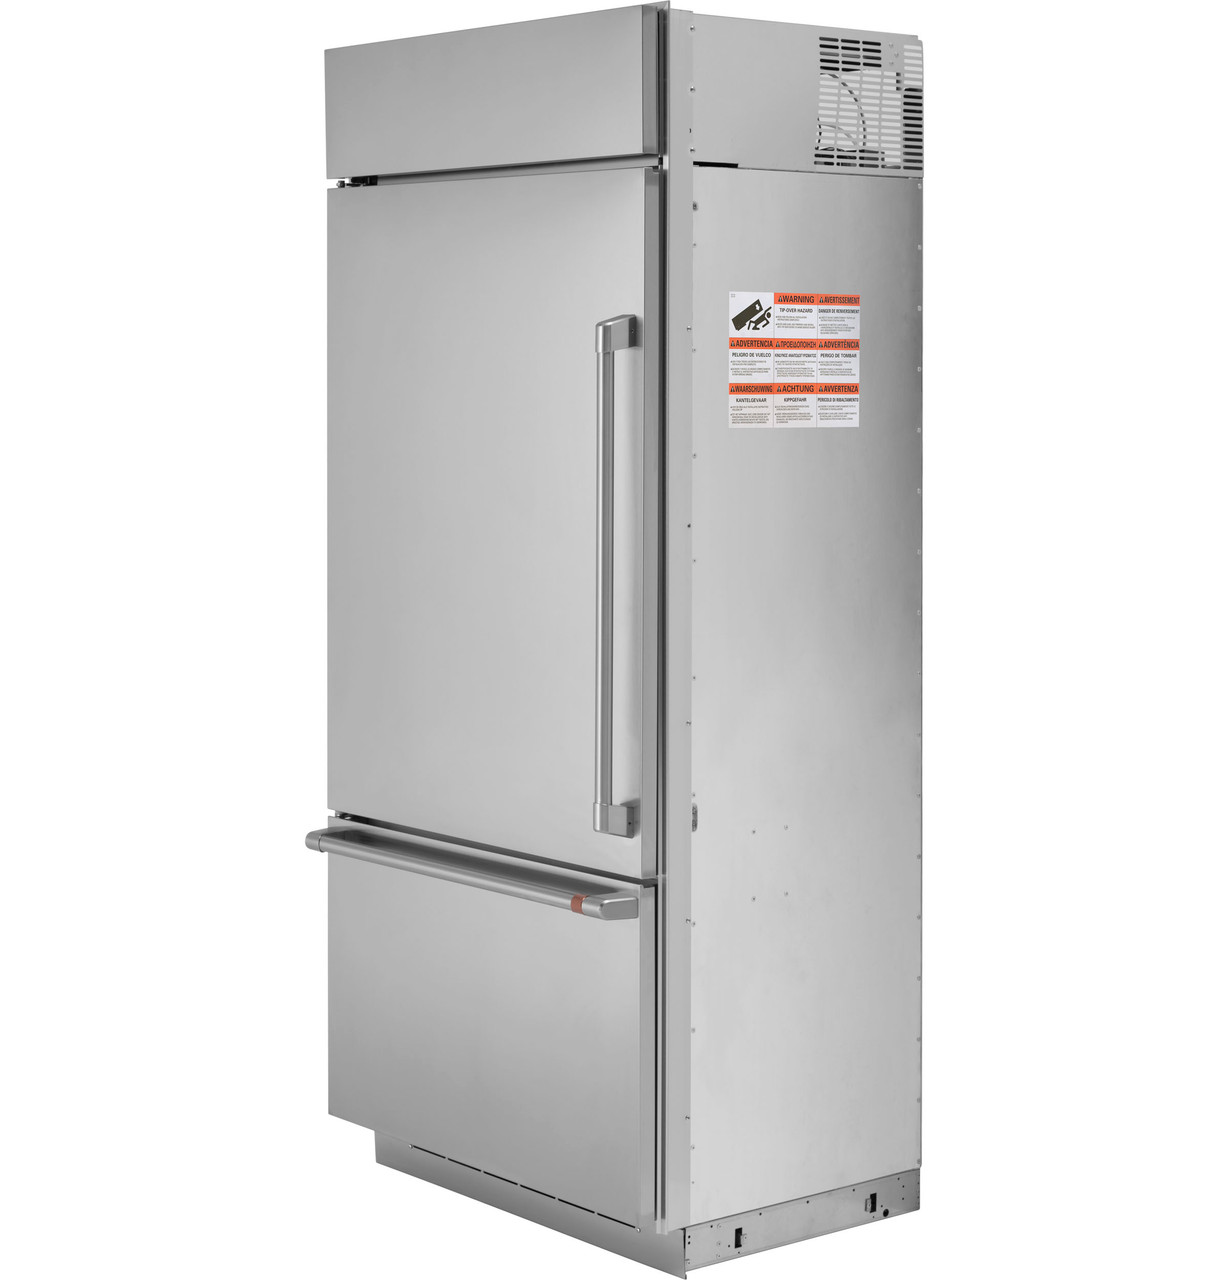 GE Cafe CDB36RP2PS1 - 36 Refrigerator Bottom Freezer Build-In Stainless